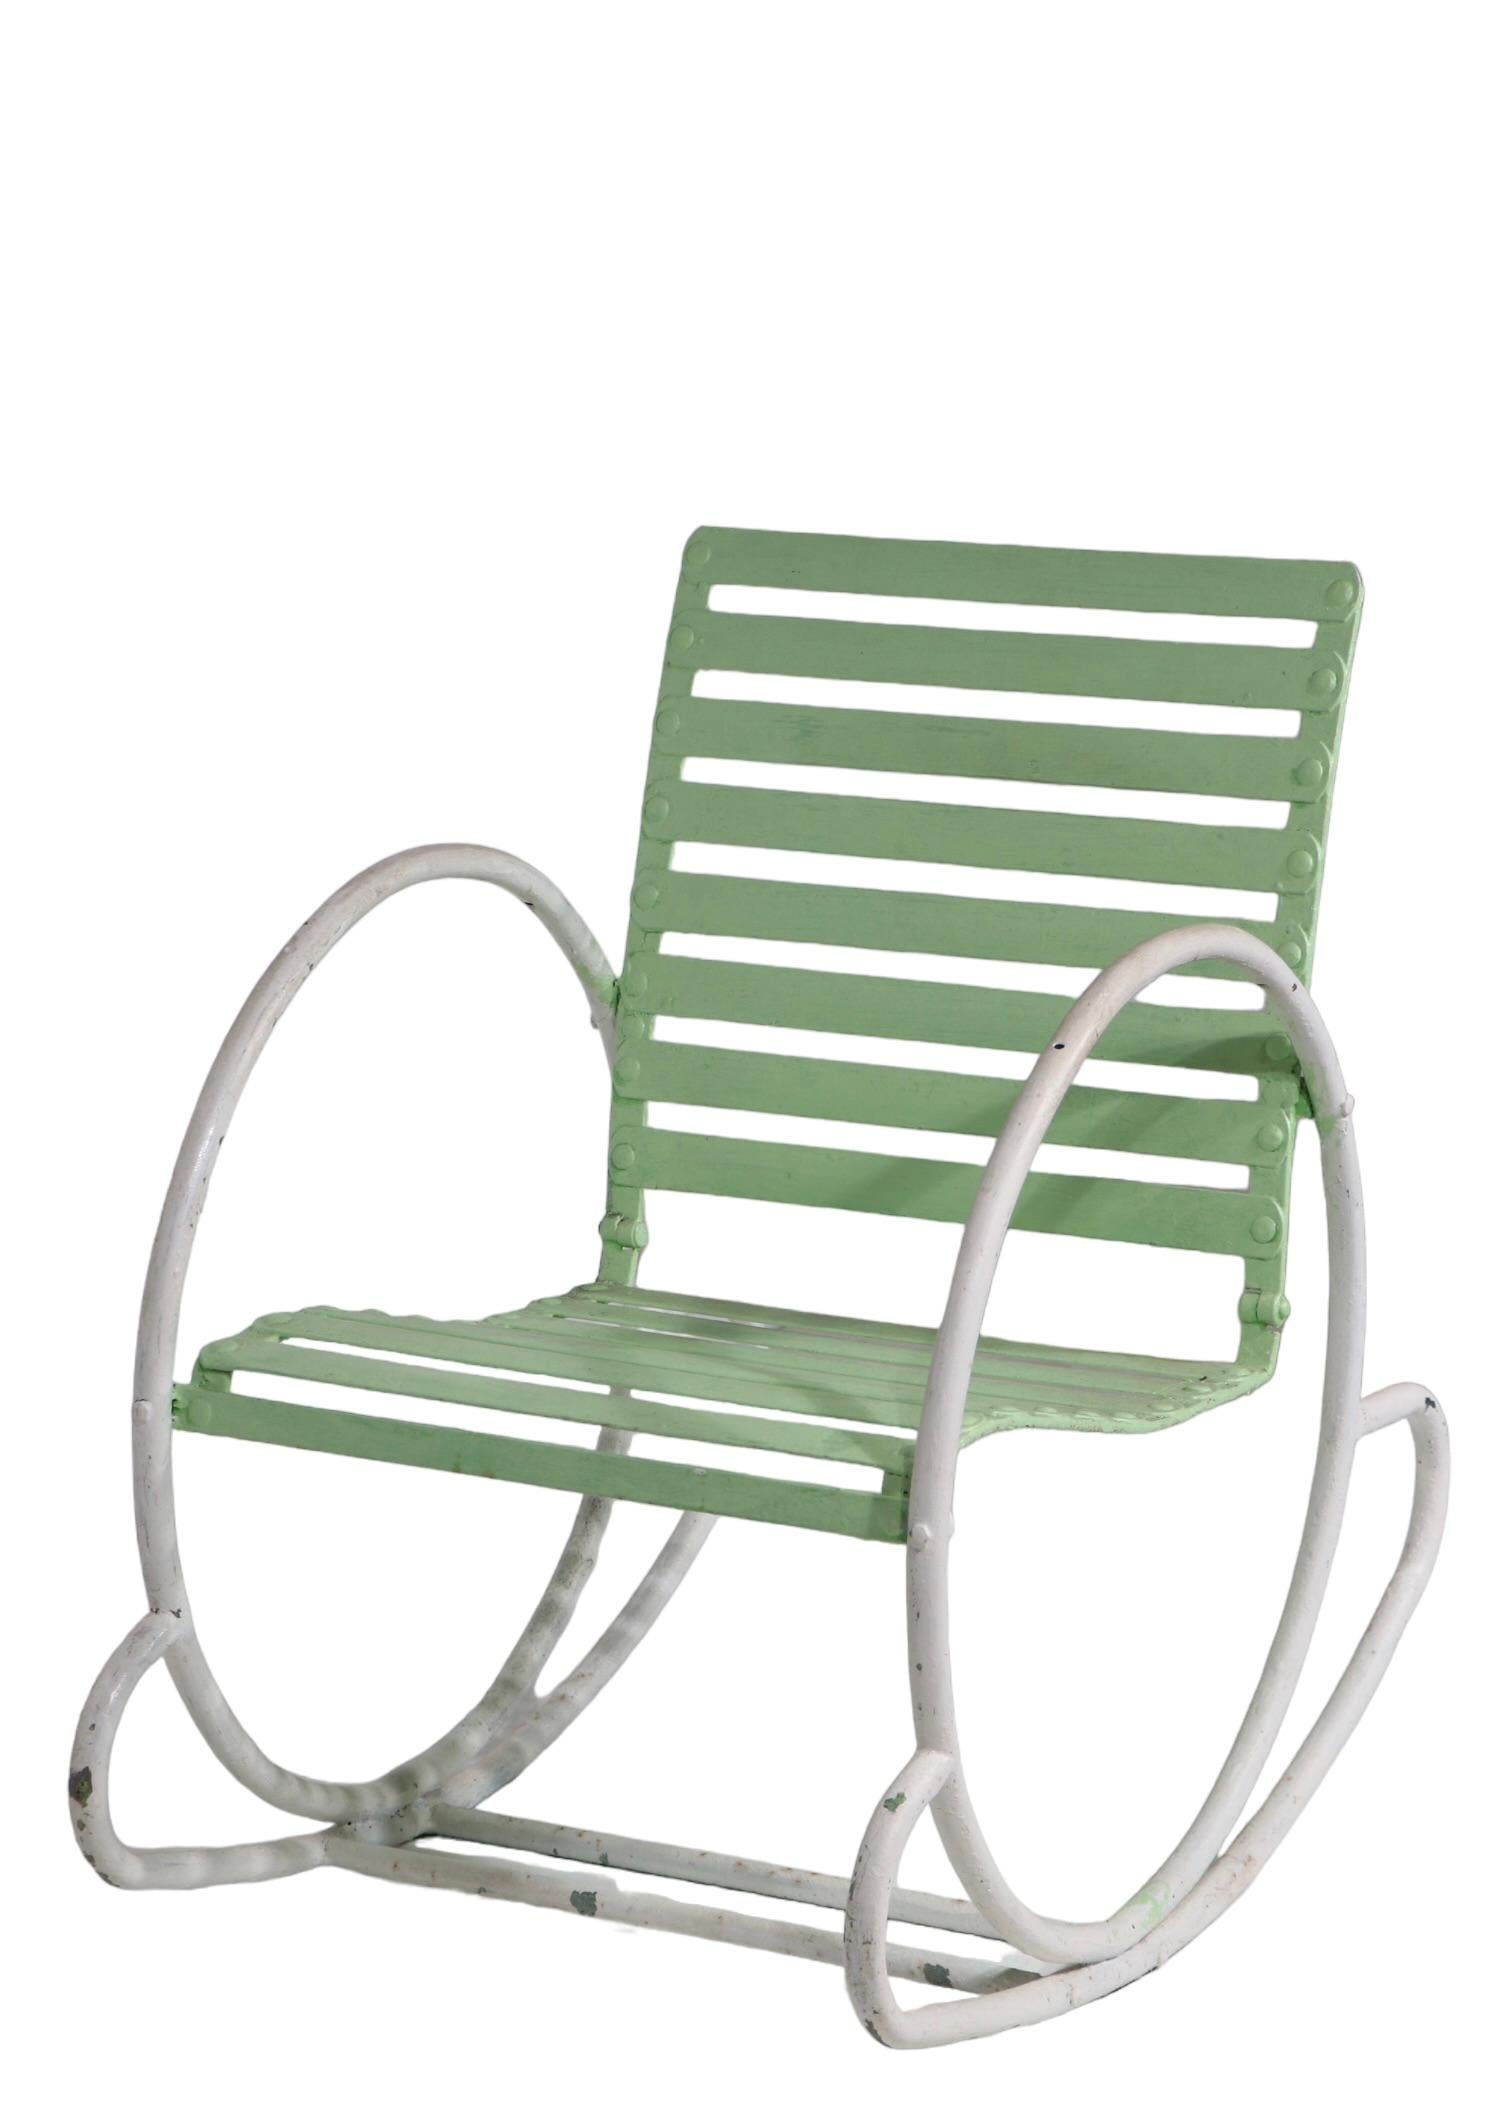 Art Deco Iron and Steel Garden Patio Poolside  Hoop Frame Rocking Chair c 1930's For Sale 14